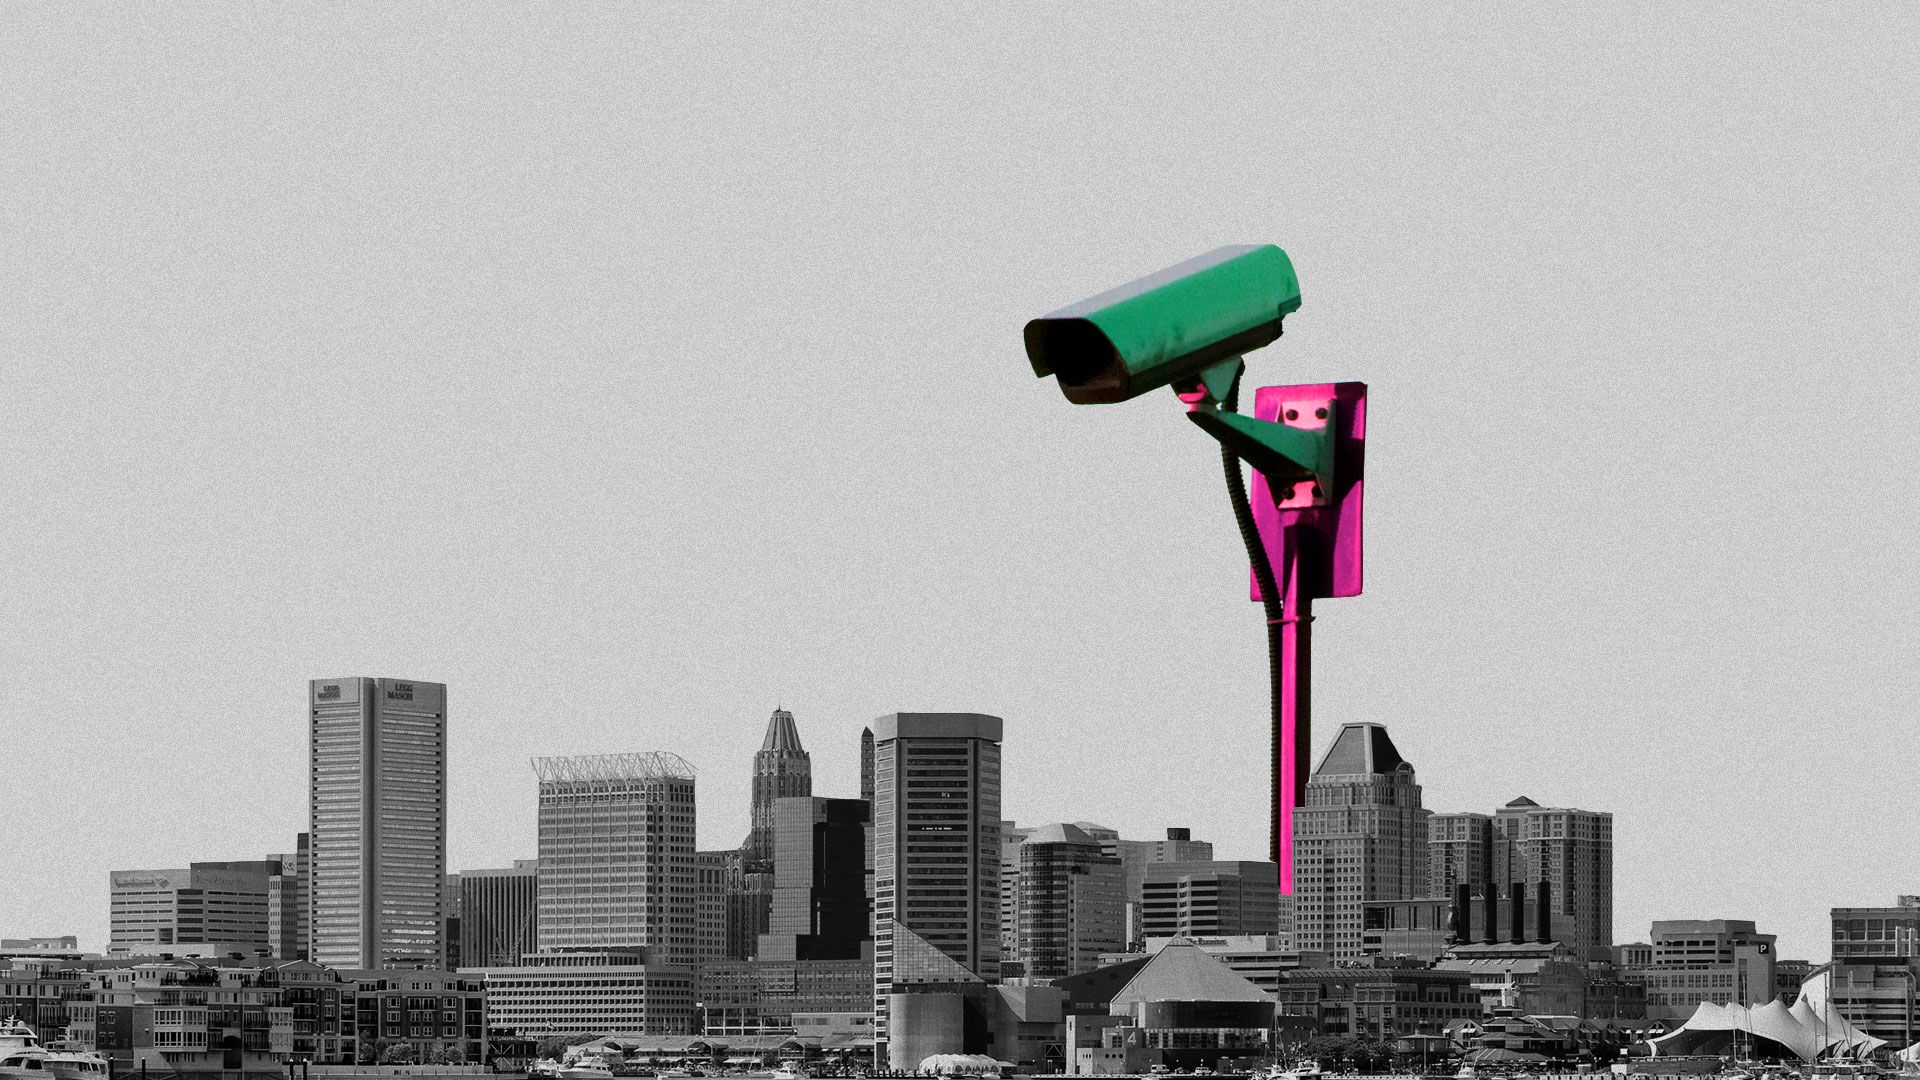 Illustration of the Baltimore city skyline with a massive CCTV camera overlooking the city from above. 